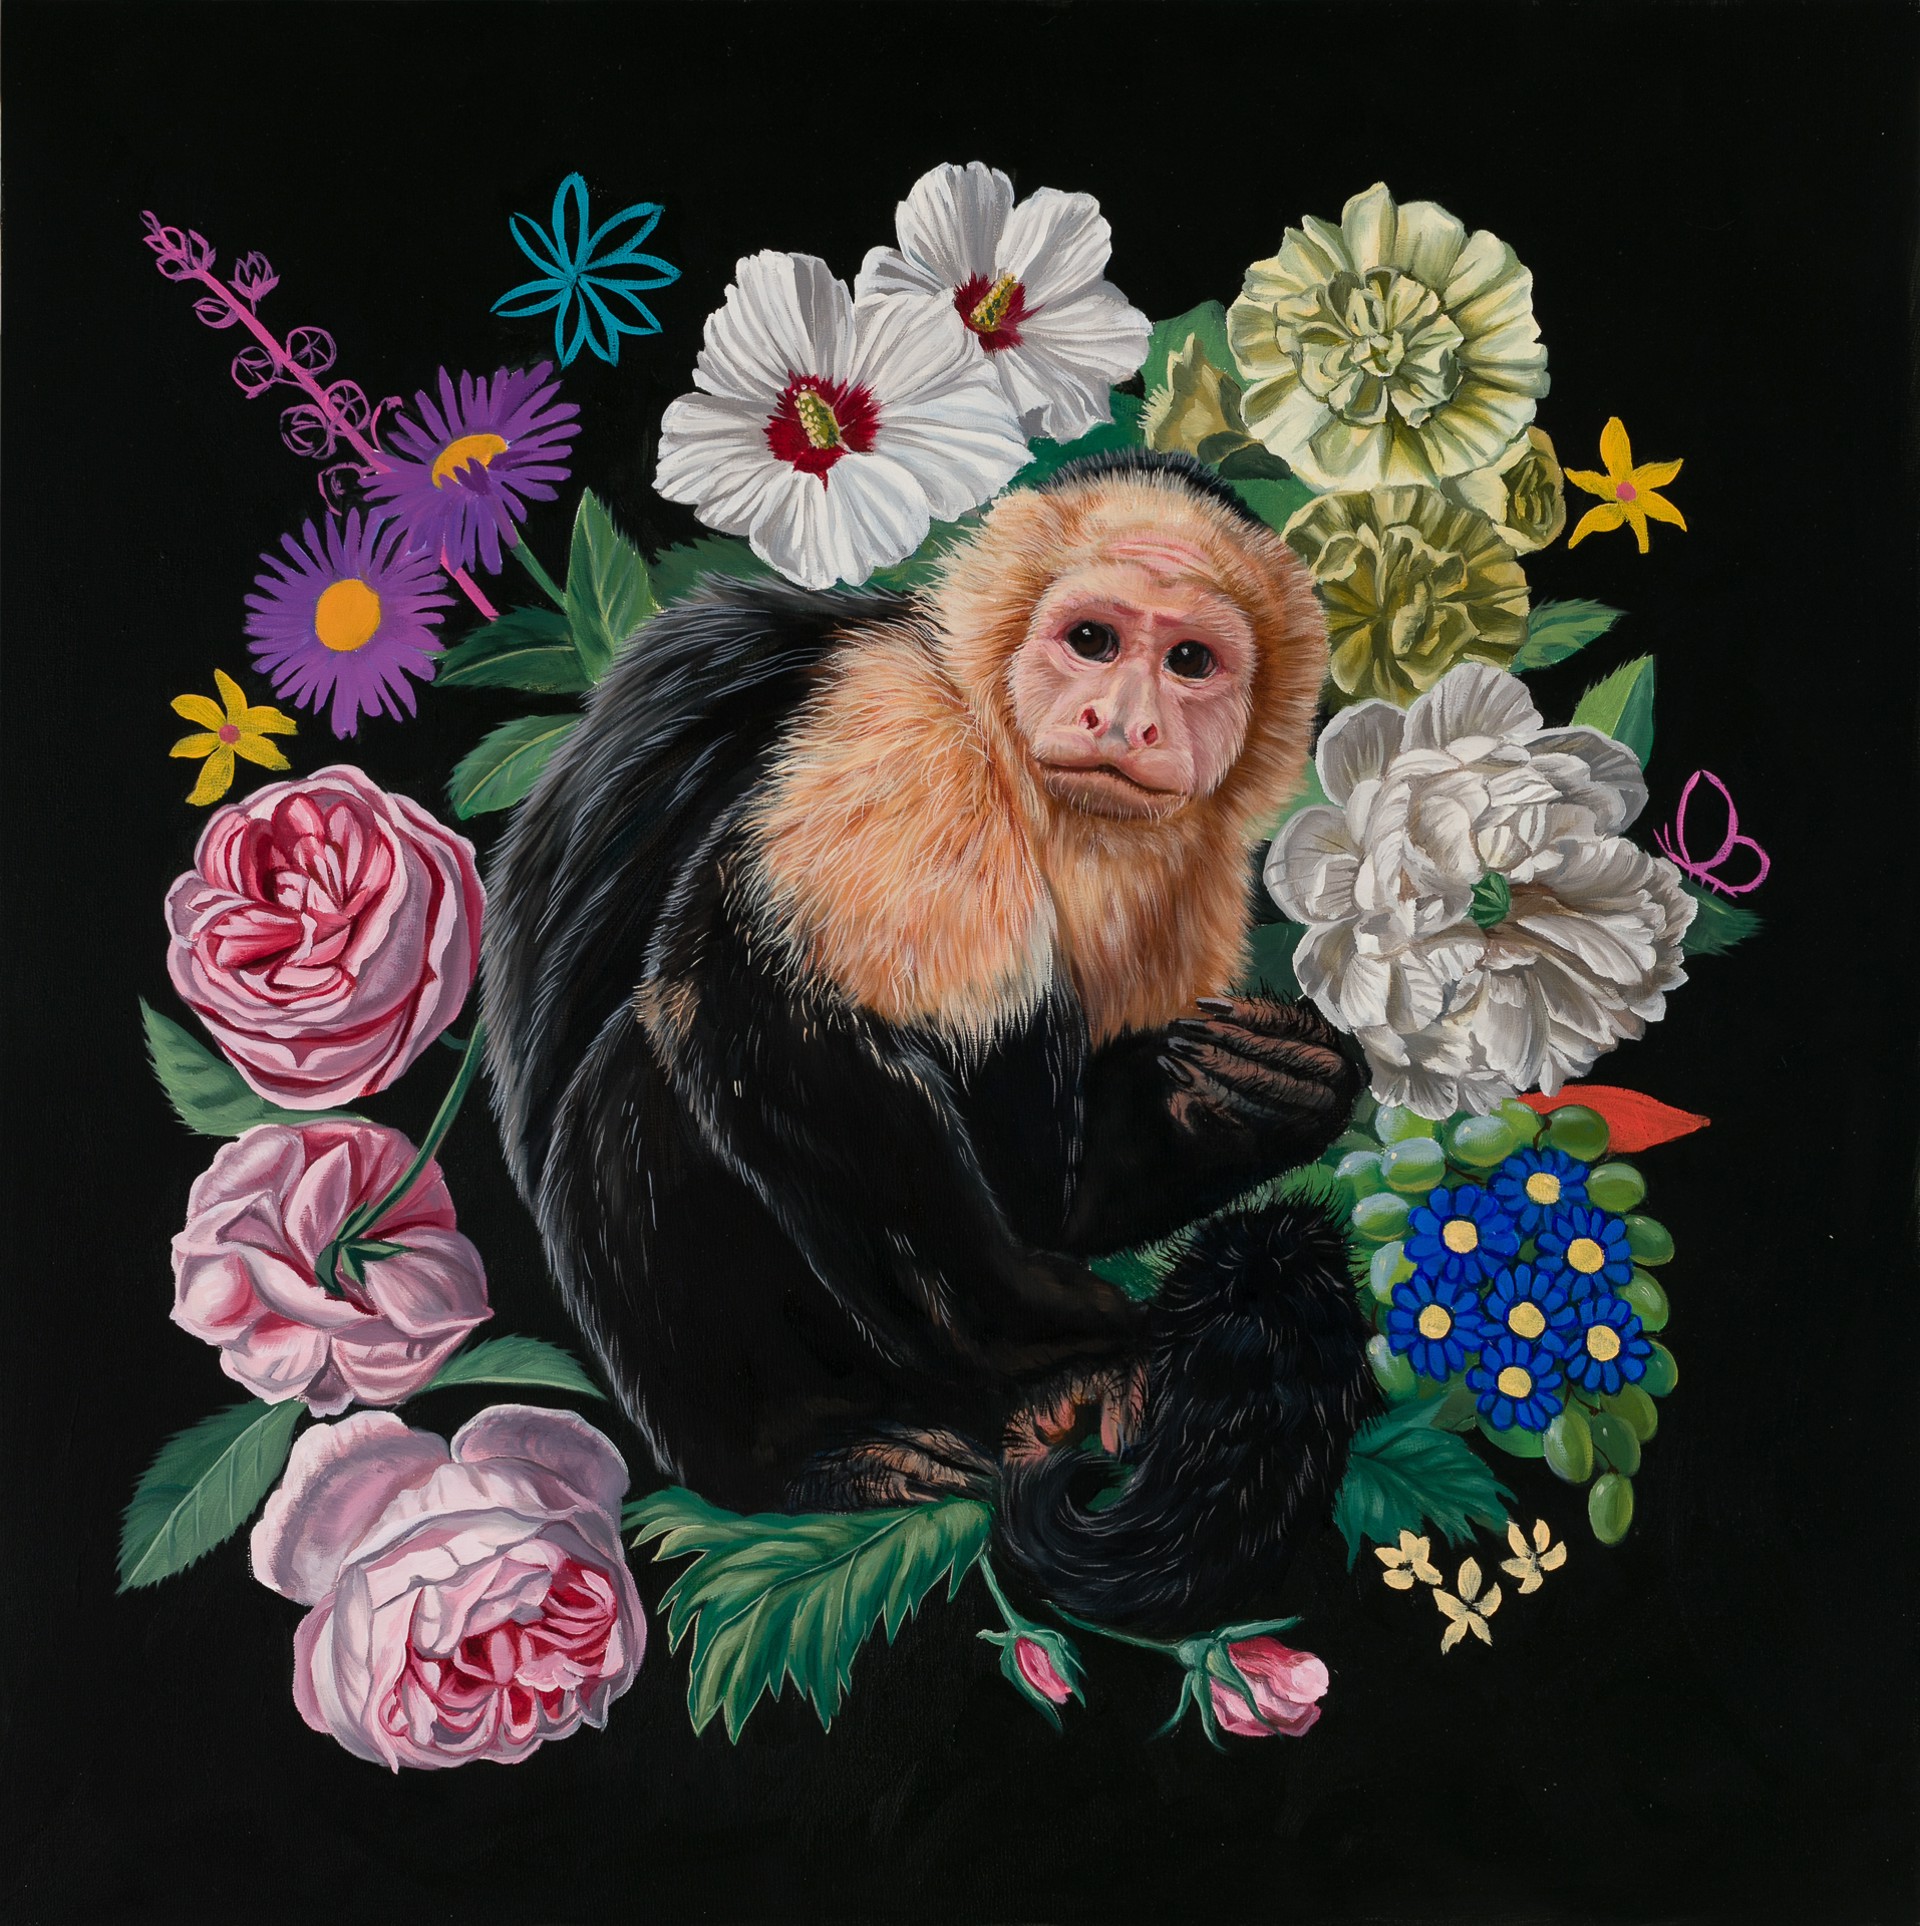 Capuchin with Wreath by Robin Hextrum